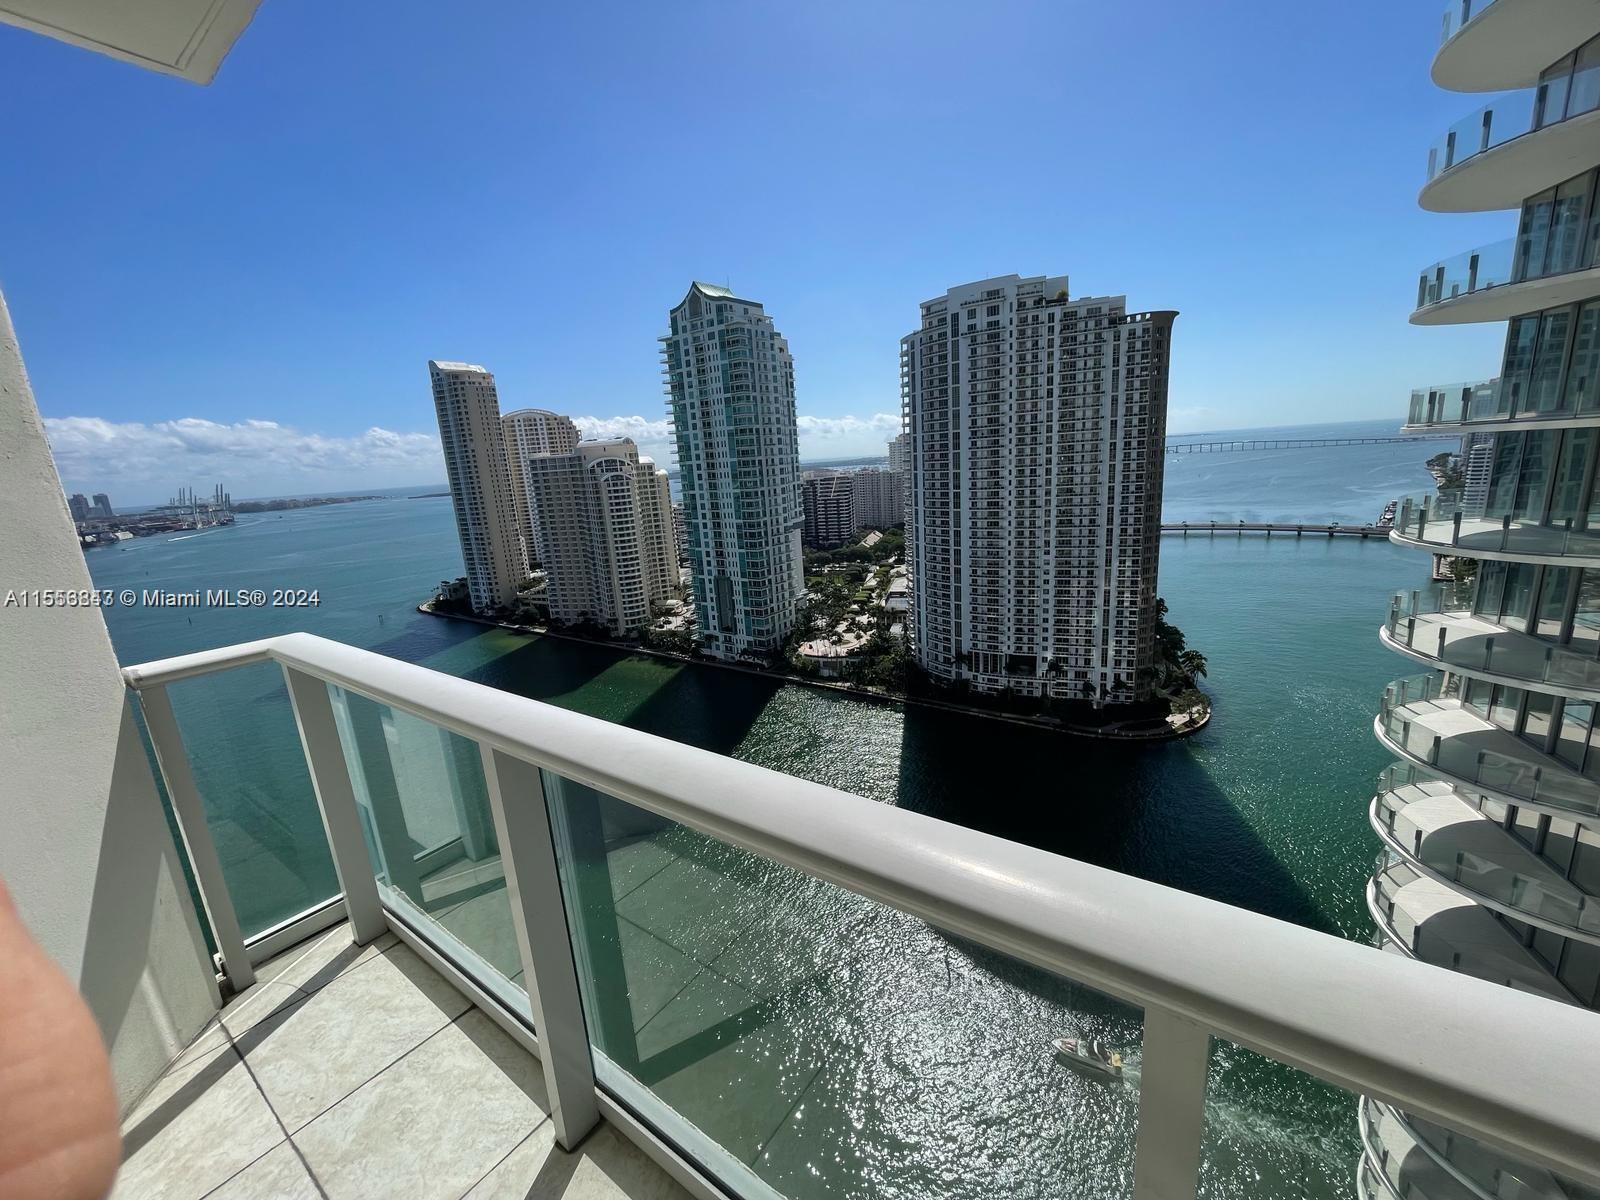 GREAT OPPORTUNITY FOR INVESTORS OR NEW OWNER RESIDENTS - 2/2 SPLIT PLAN UNIT, WHITE PORCELAIN FLOORS THROUGHOUT, OPEN KITCHEN, GRANITE COUNTERTOPS, SS APPLIANCES, WASHER AND DRYER ON THE UNIT, WALK-IN CLOSETS, HIGH CEILINGS, BATHTUBS IN BOTH BATHROOMS, WELL MAINTAINED AND IN PERFECT CONDITIONS, BALCONY OFFERING PARTIAL VIEWS TO PORT OF MIAMI, AND MIAMI RIVER CONJUNCTION WITH BISCAYNE BAY. ACCESS TO DOWNTOWN, MIAMI BEACH & EXPRESSWAYS. WALK TO THEATERS, RESTAURANTS, METRORAIL, BAYSIDE MALL. ONE ASSIGNED PARKING SPACE - please note that the pool deck is closed and under renovation****